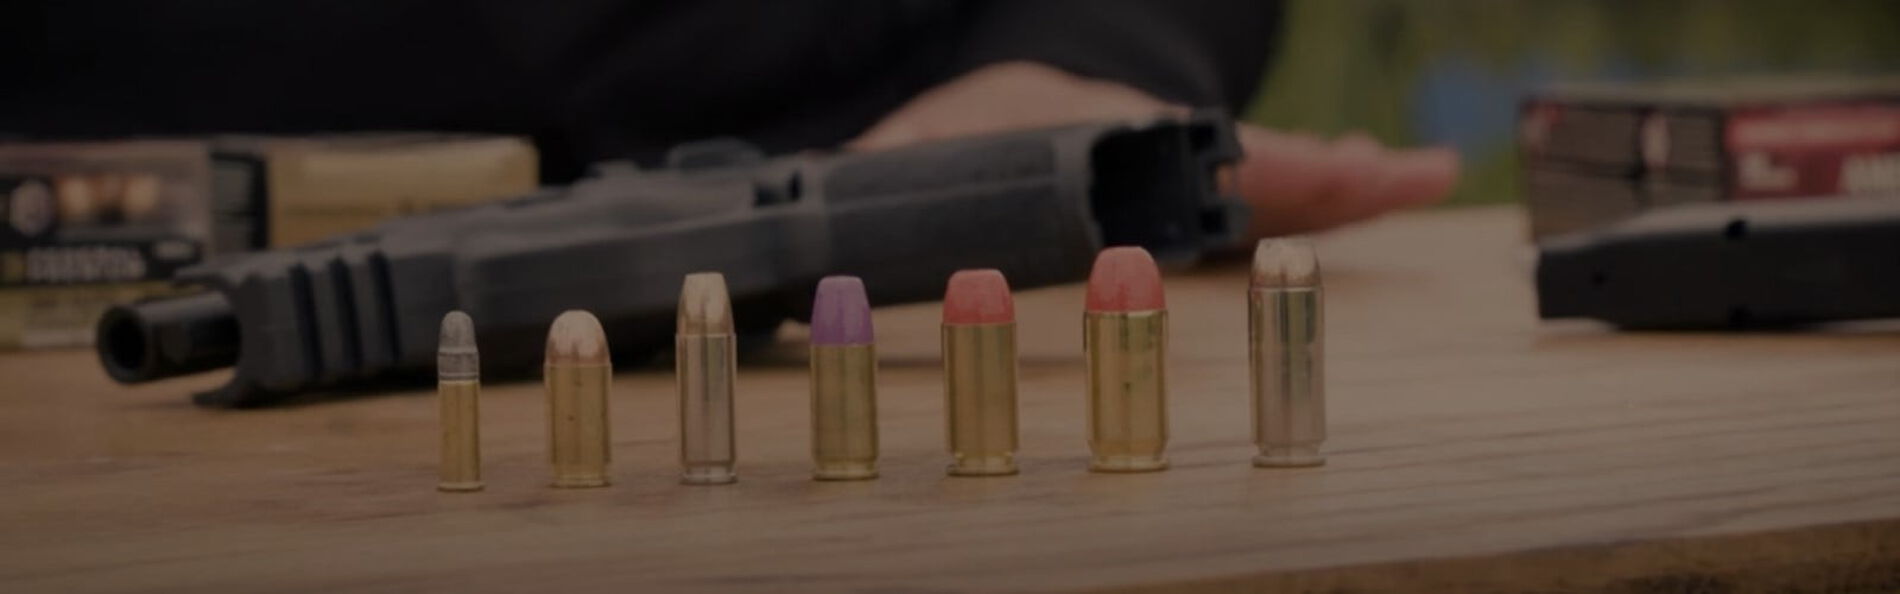 different caliber Federal cartridges lined-up on a table in front of a handgun